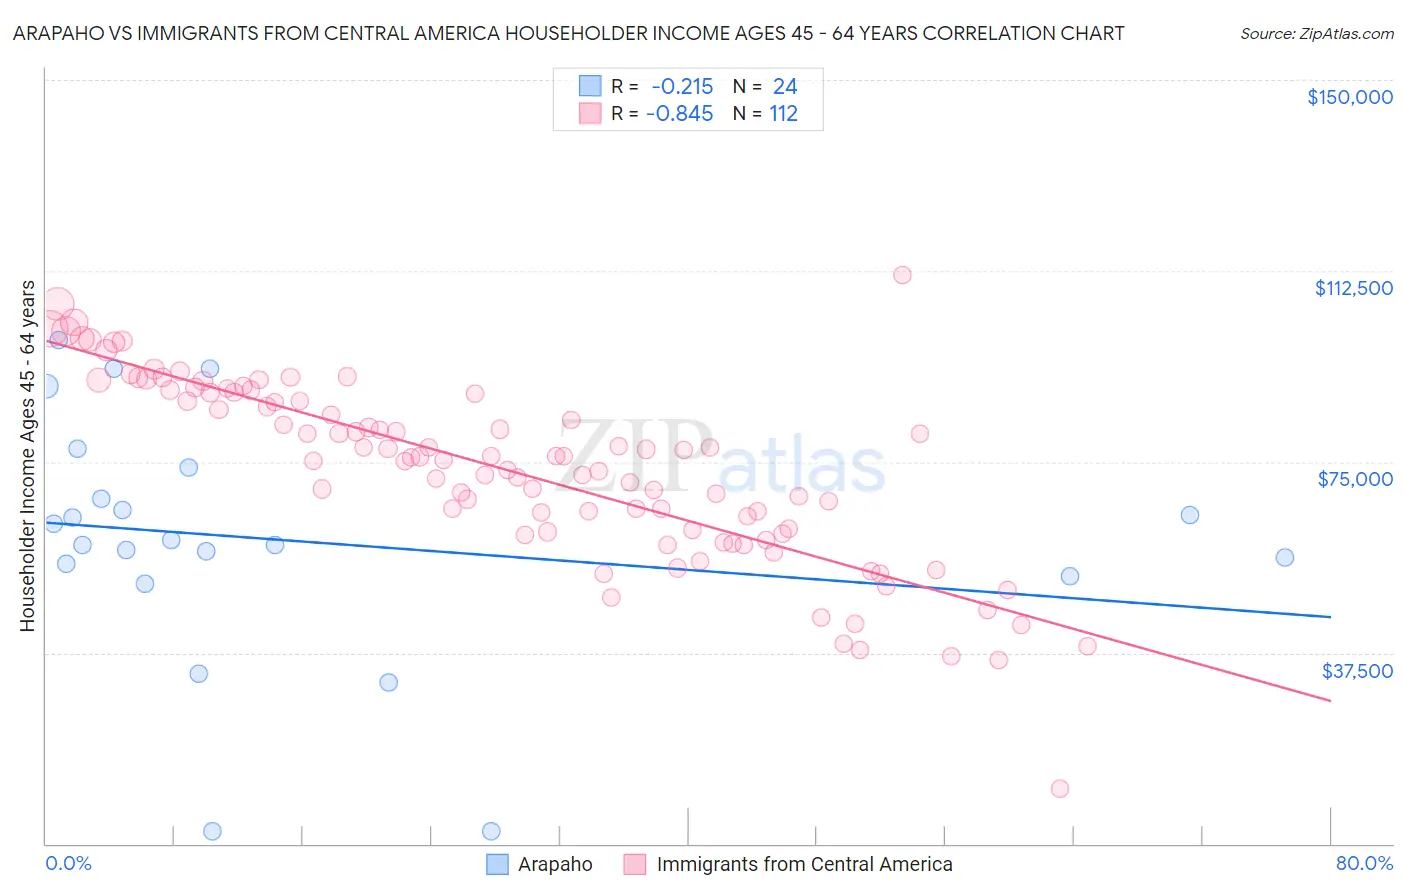 Arapaho vs Immigrants from Central America Householder Income Ages 45 - 64 years